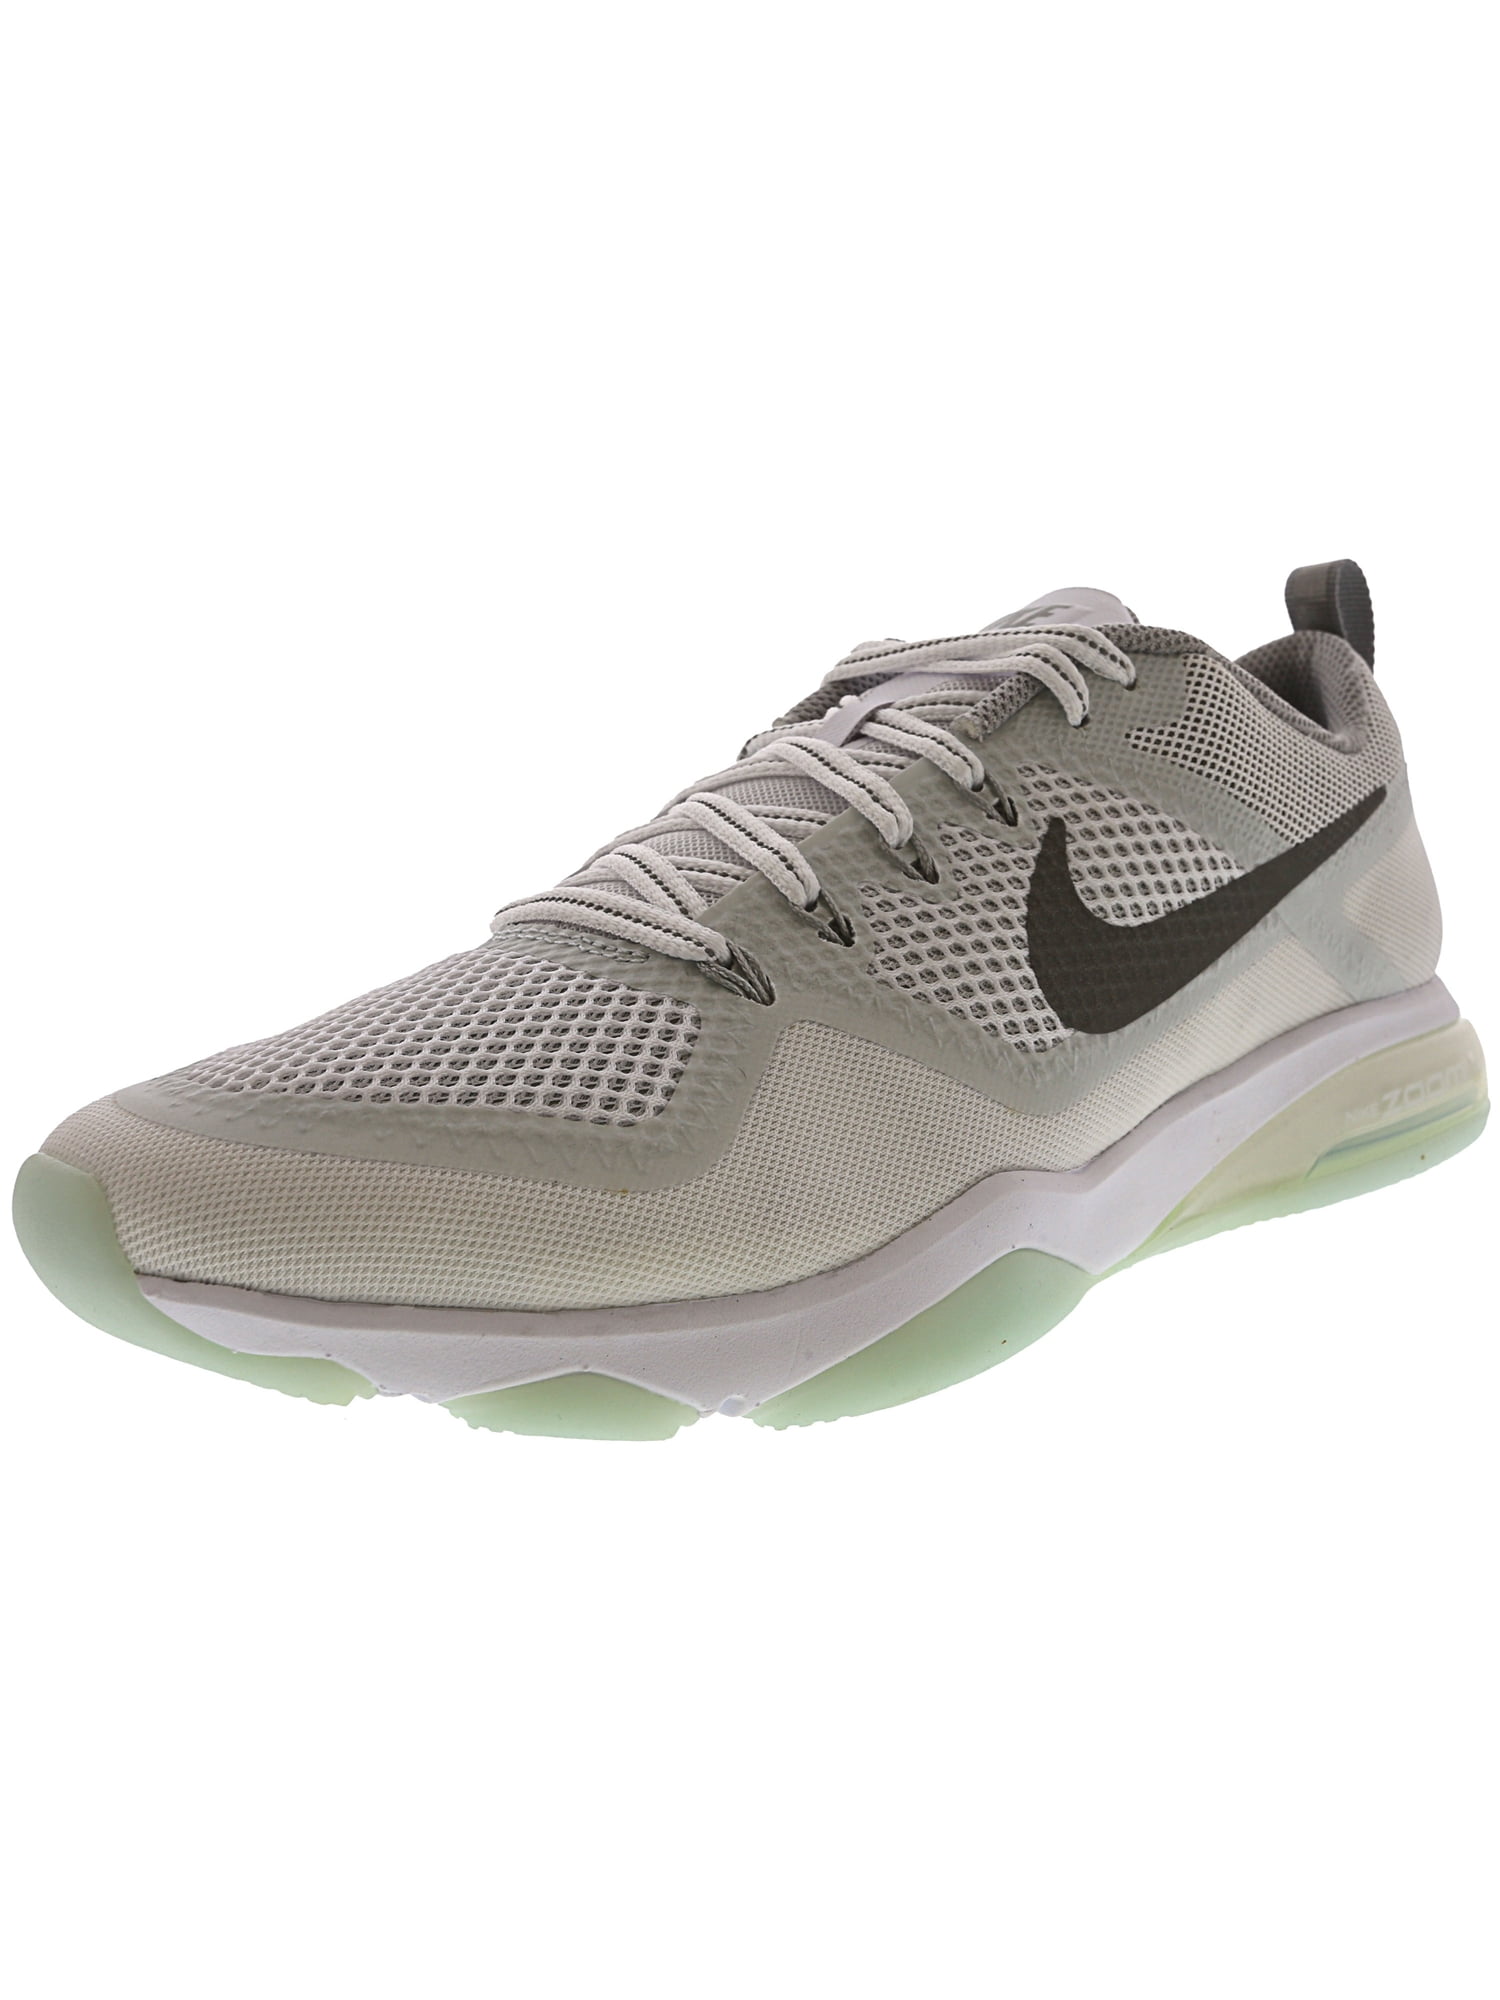 Nike - Nike Women's Air Zoom Fitness Reflect White / Silver Ankle ...